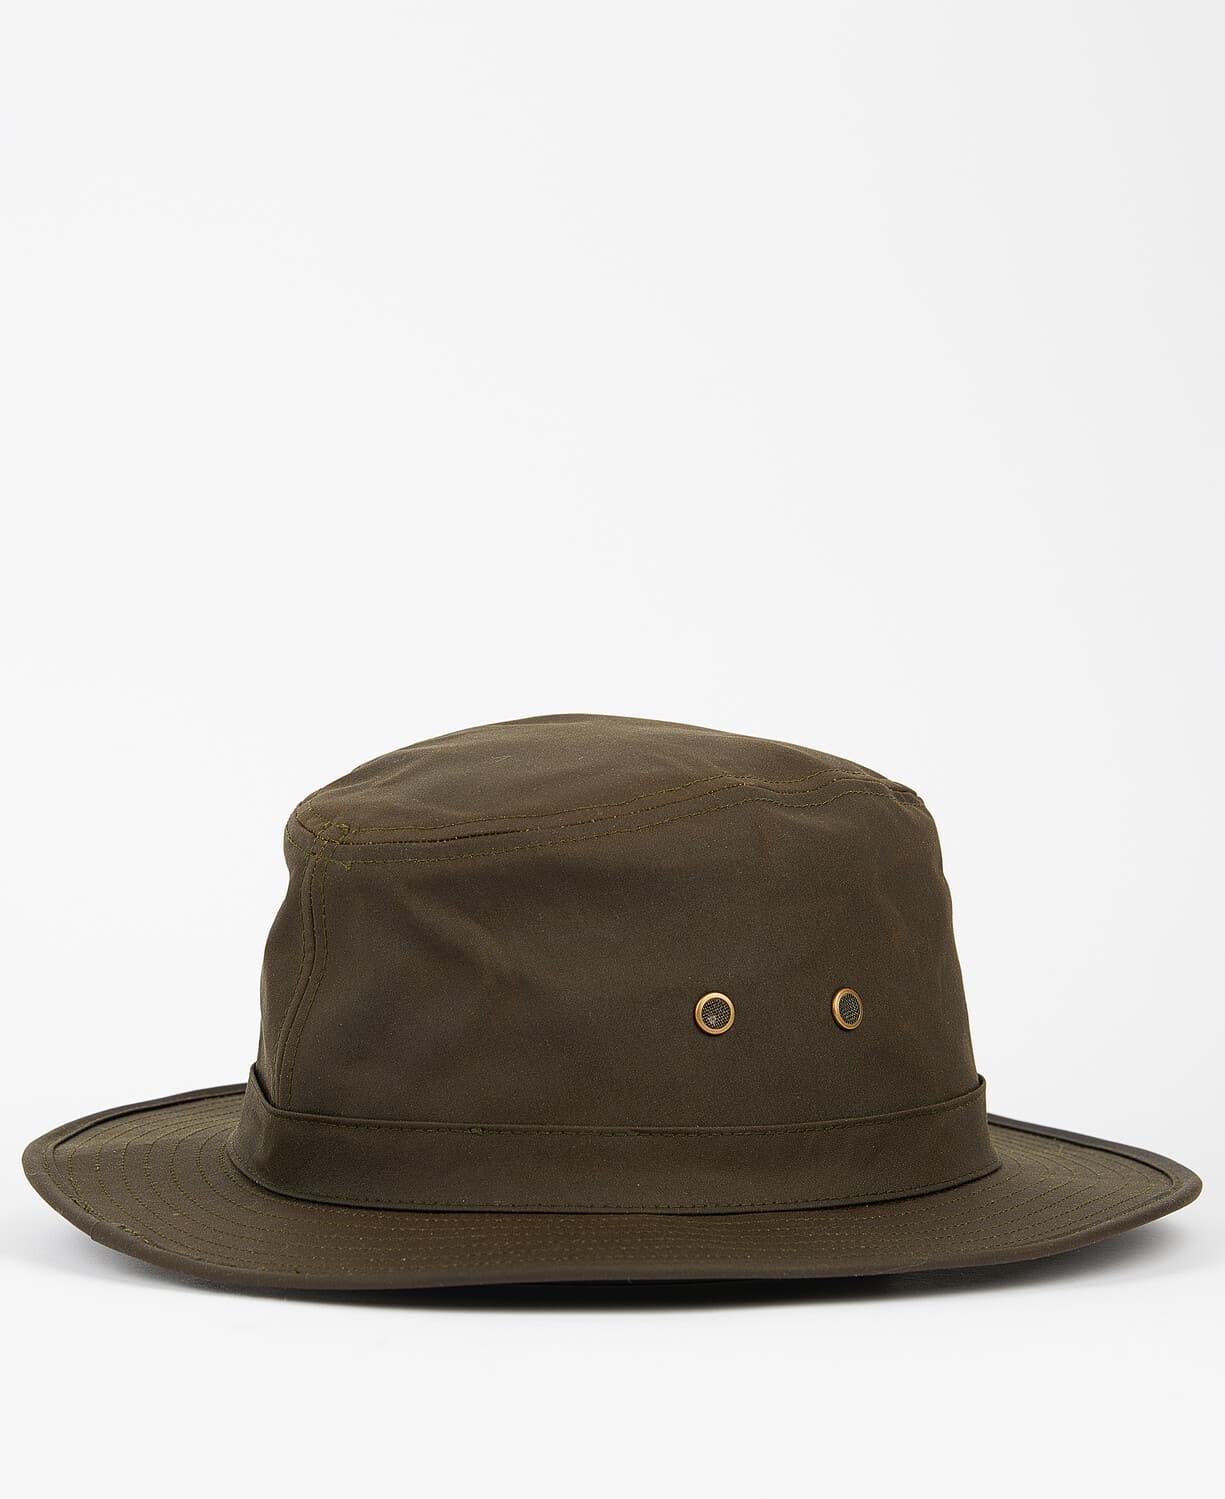 Dawson Wax Safari Hat - Olive - Out and About